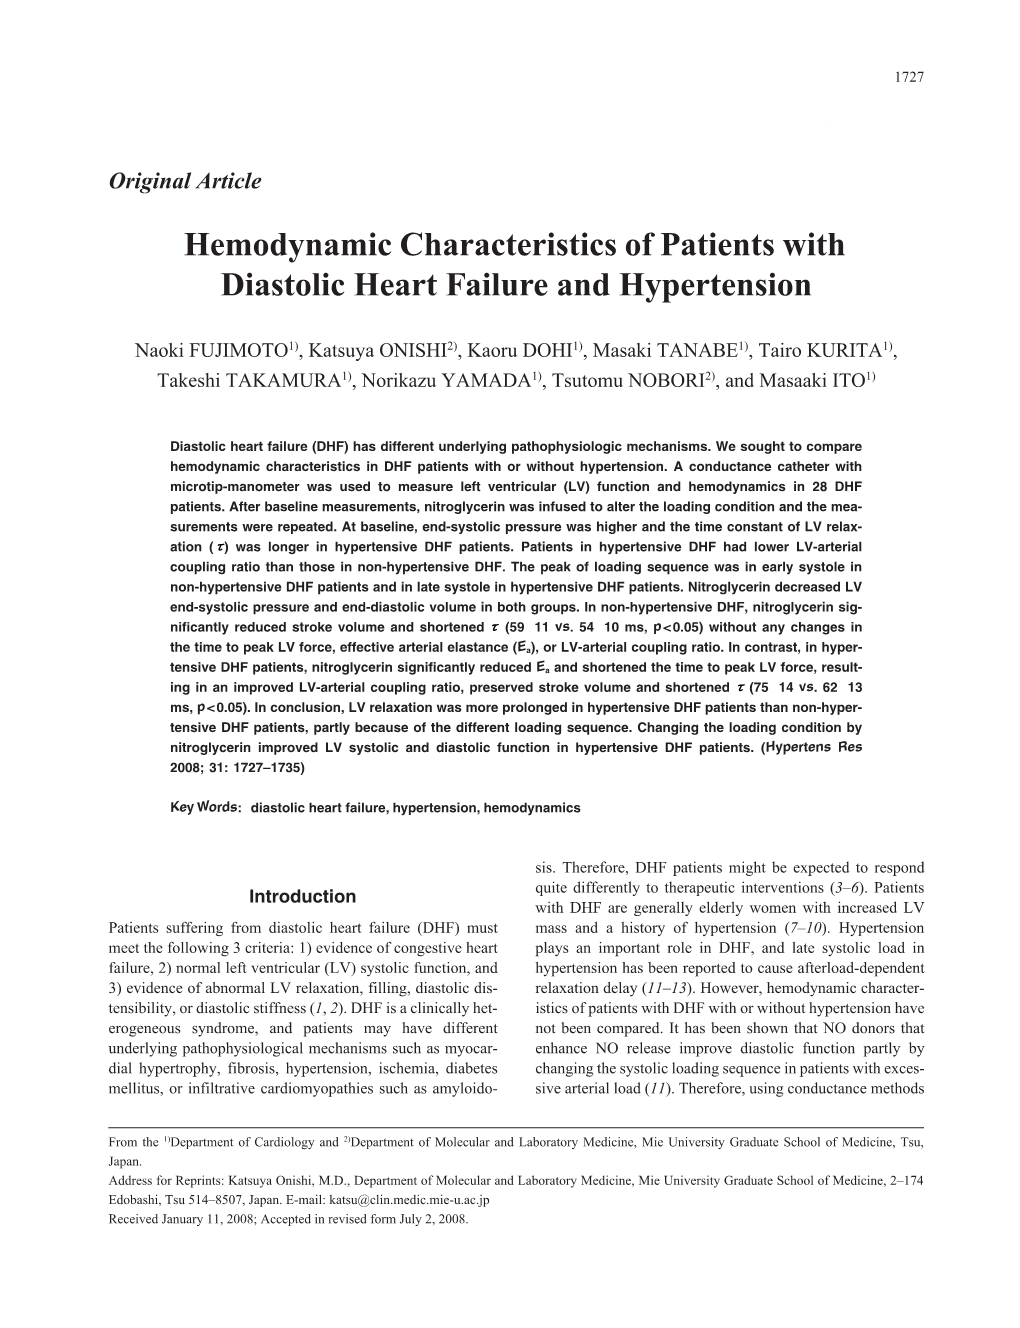 Hemodynamic Characteristics of Patients with Diastolic Heart Failure and Hypertension